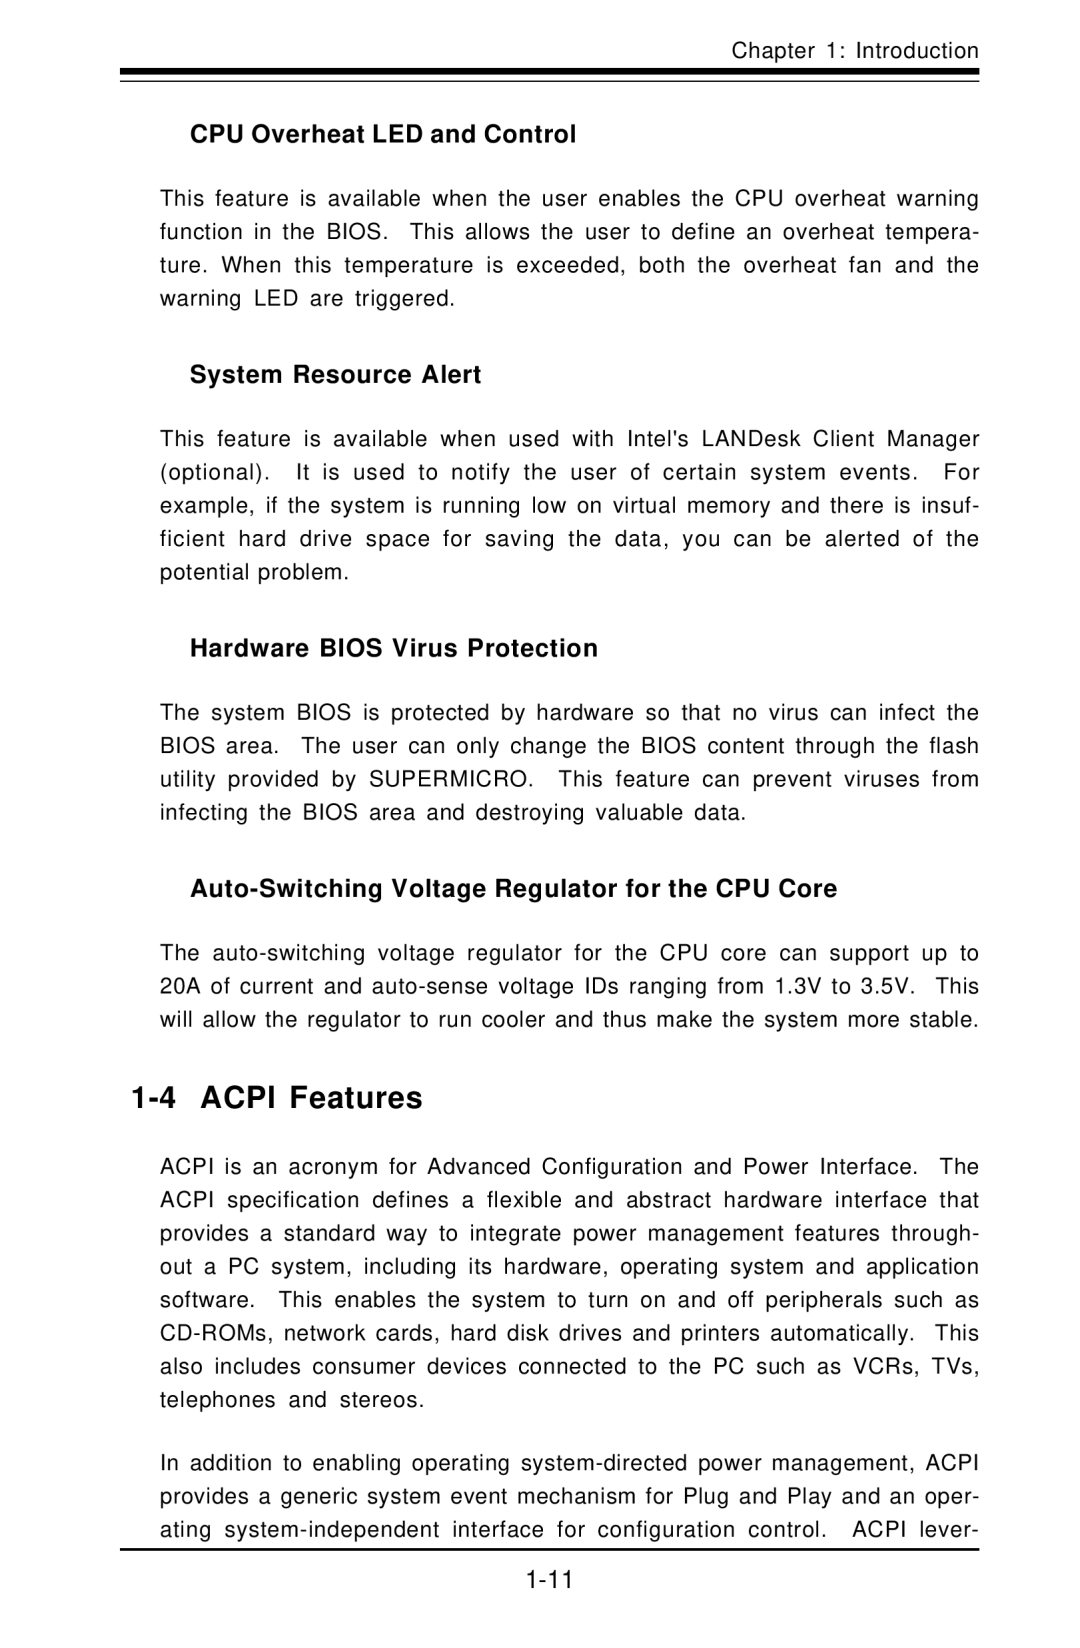 SUPER MICRO Computer SUPER, P3TDDR user manual Acpi Features, CPU Overheat LED and Control, System Resource Alert 